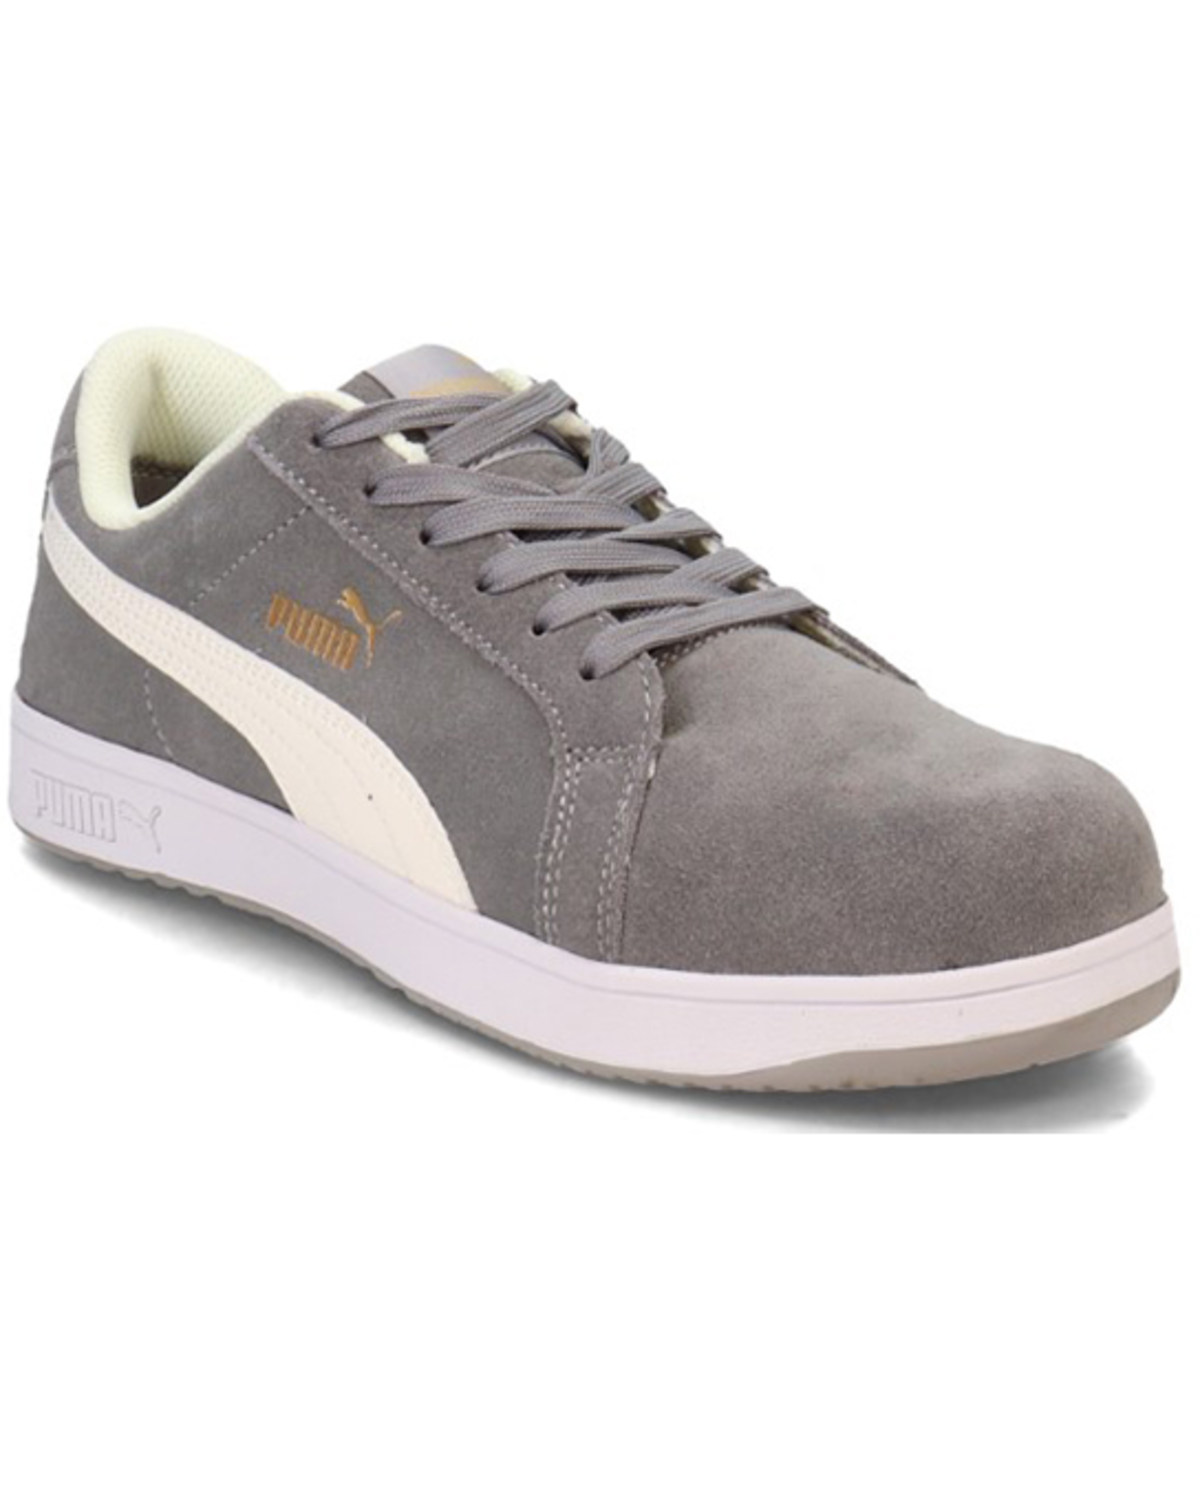 Puma Safety Men's Iconic Work Shoes - Composite Toe